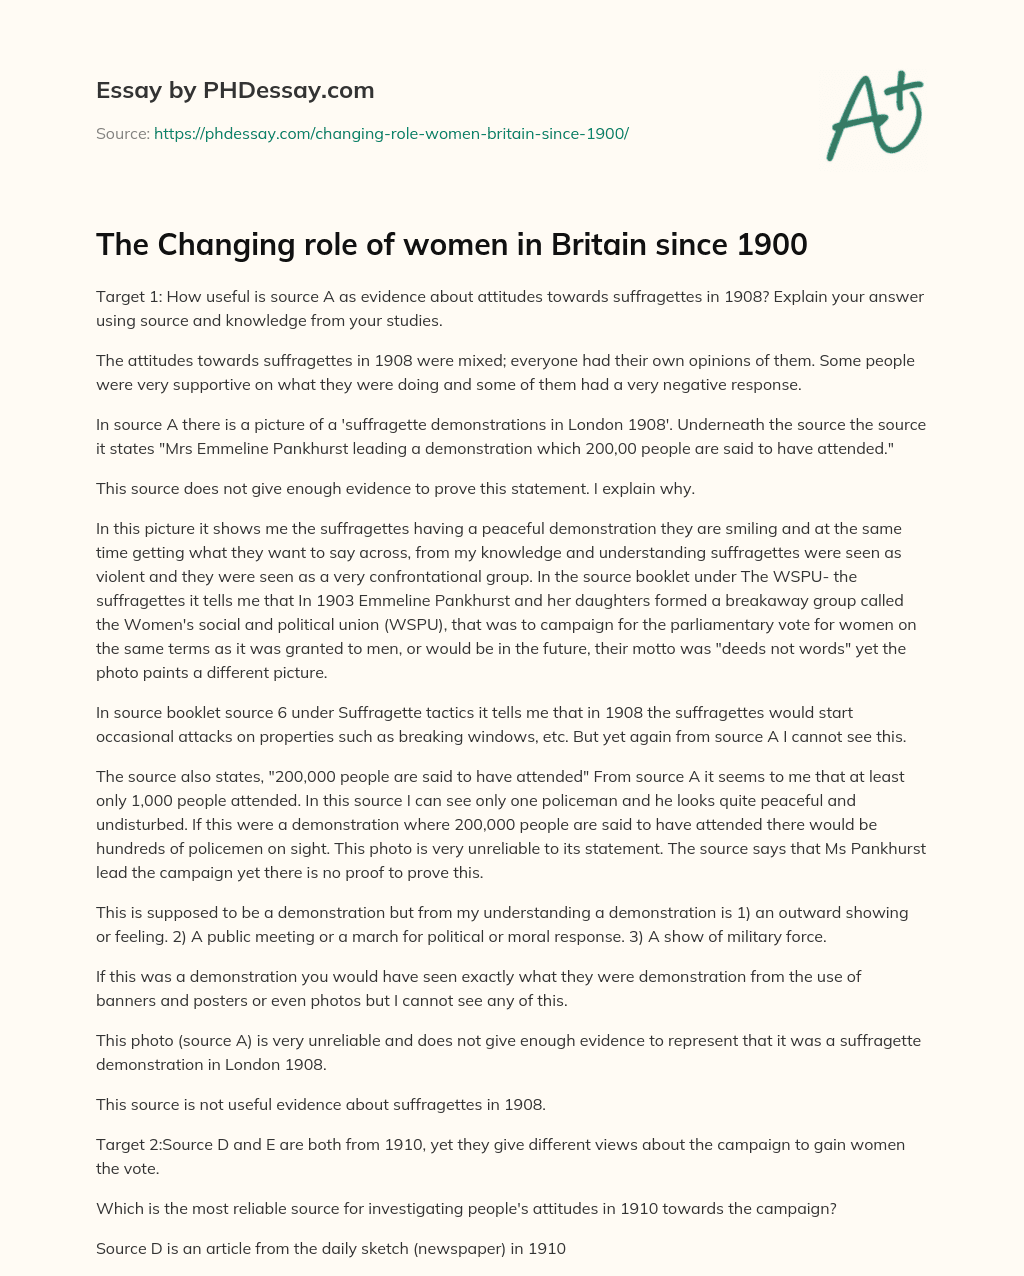 The Changing role of women in Britain since 1900 essay